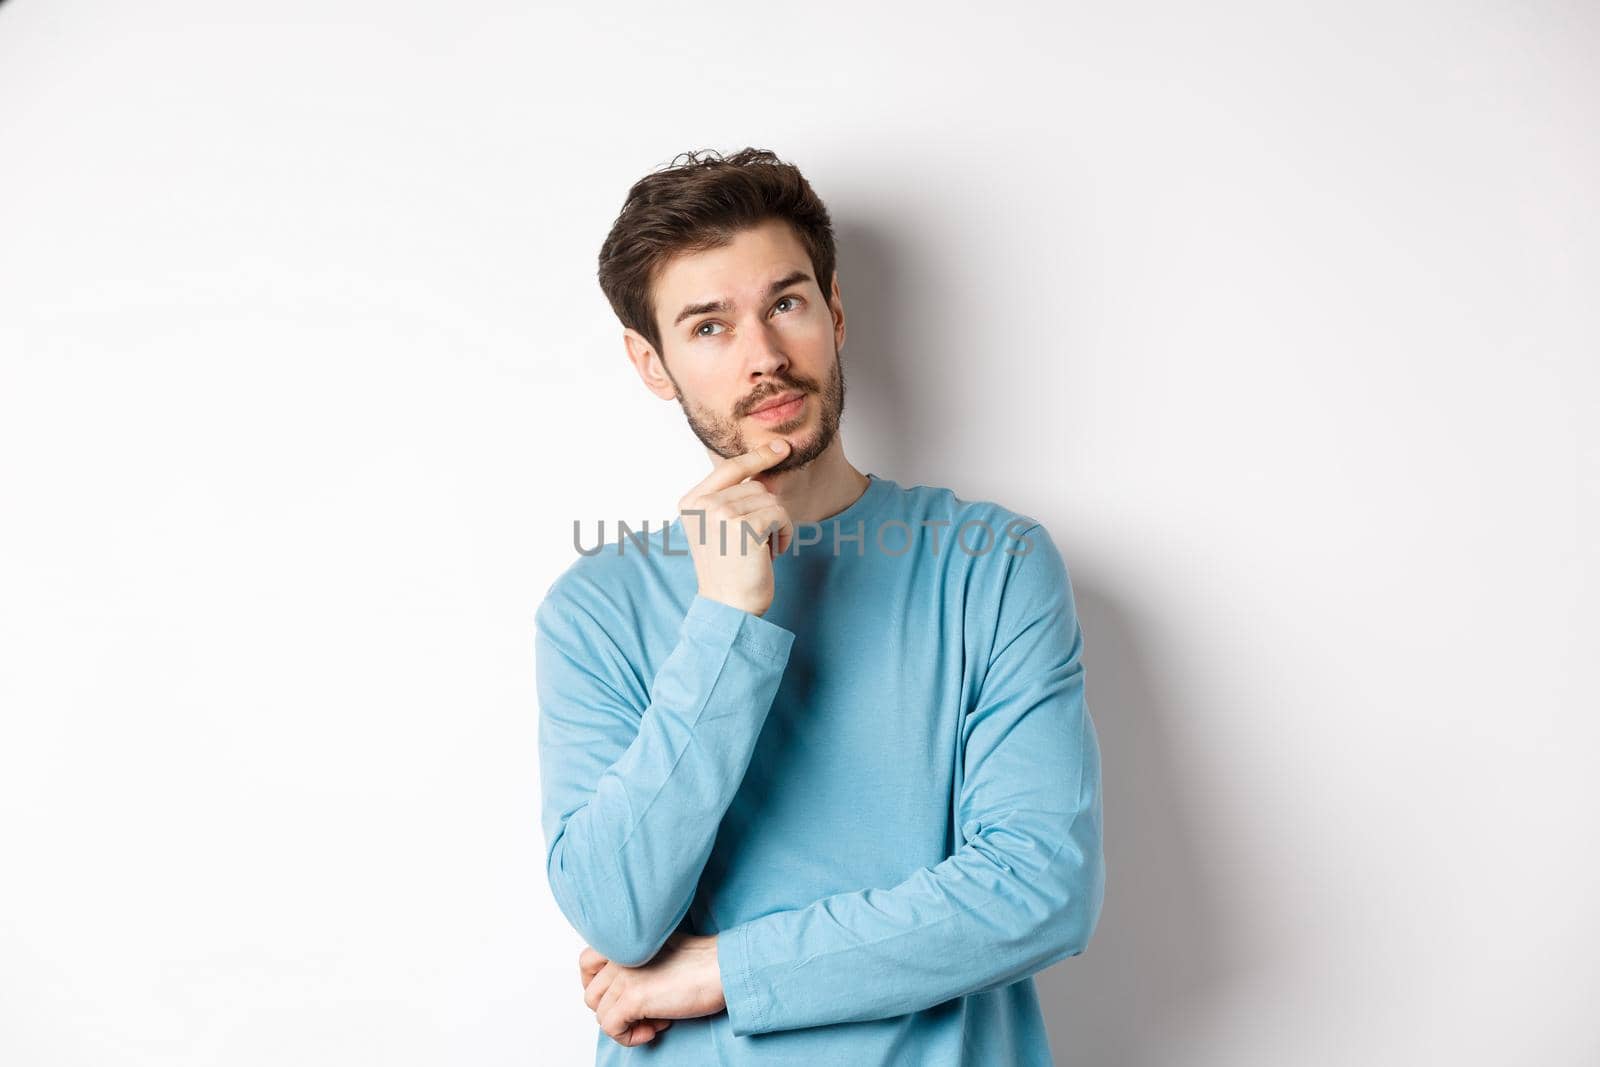 Image of handsome young man making choice, thinking and looking pensive up, standing over white background.